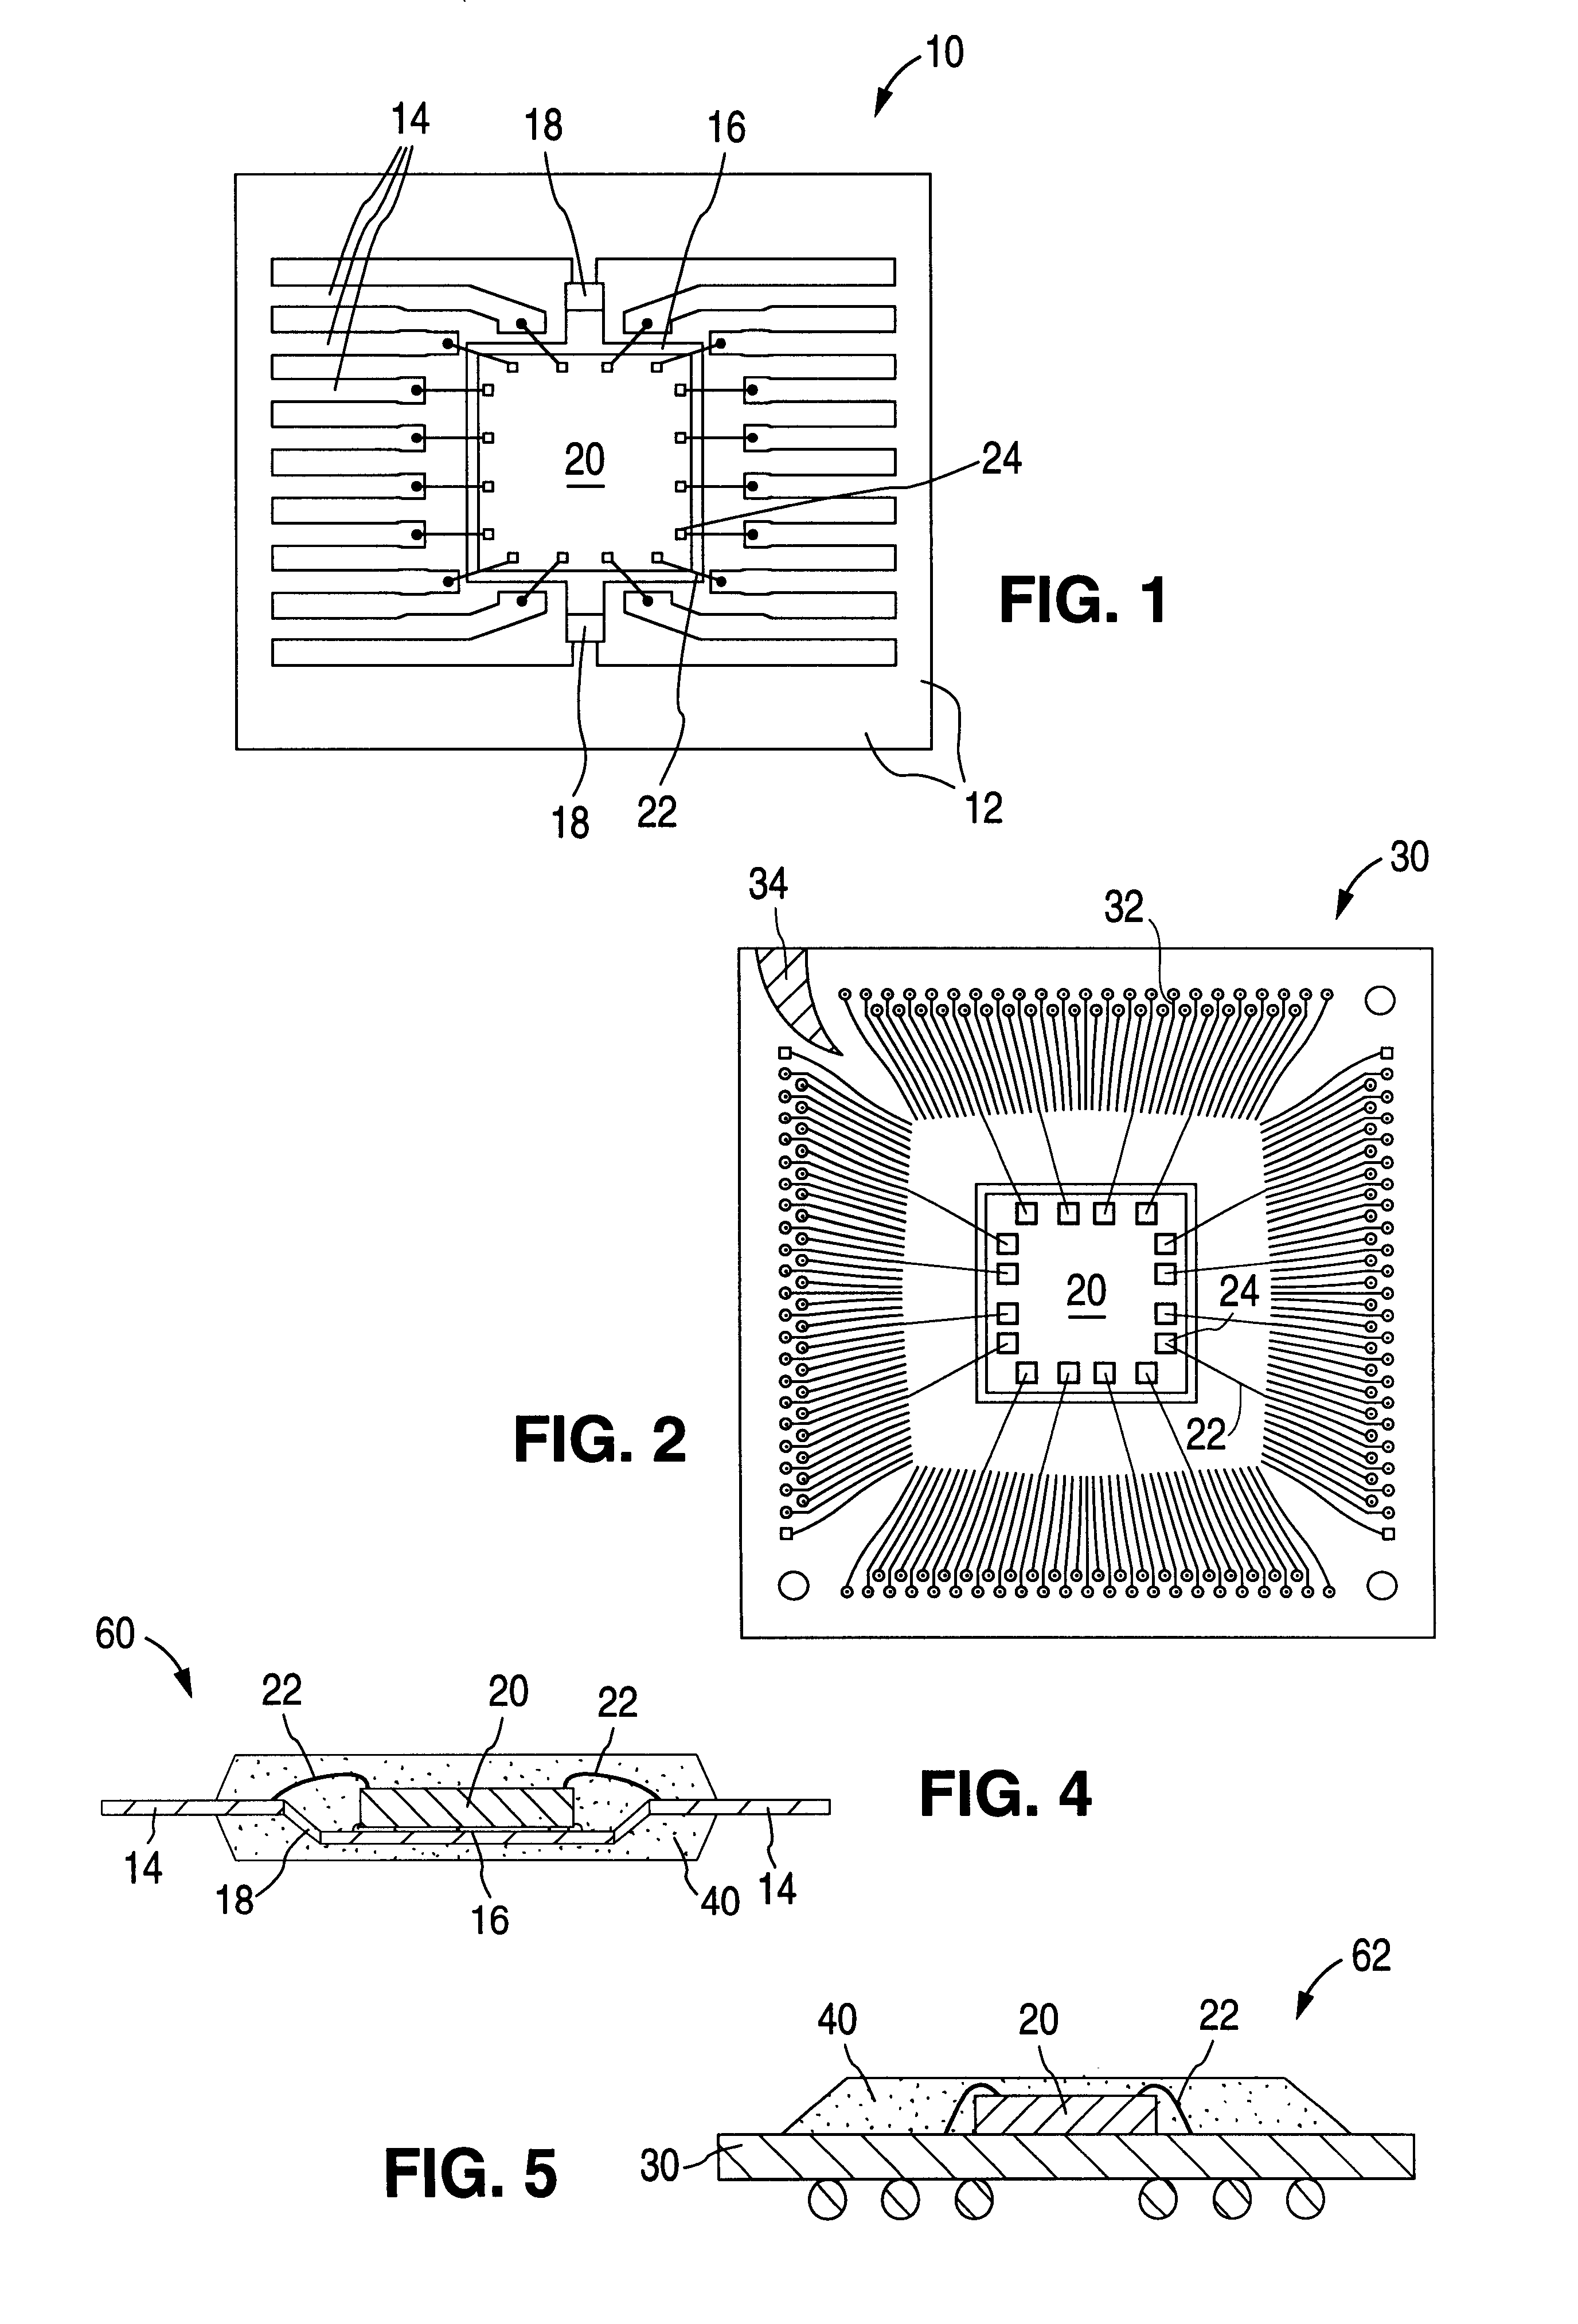 Method of molding plastic semiconductor packages